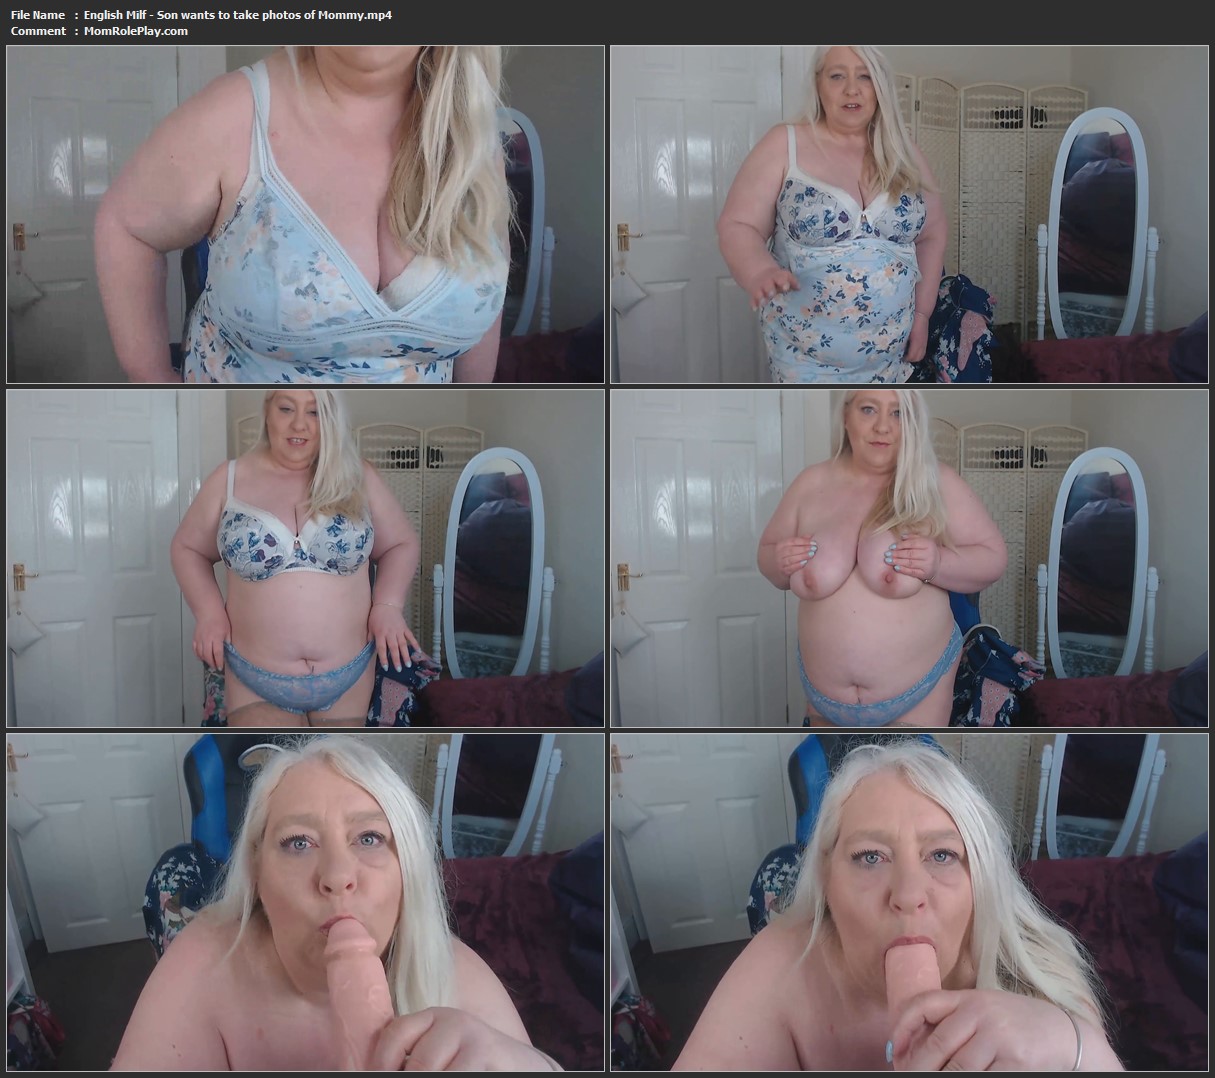 English Milf - Son wants to take photos of Mommy